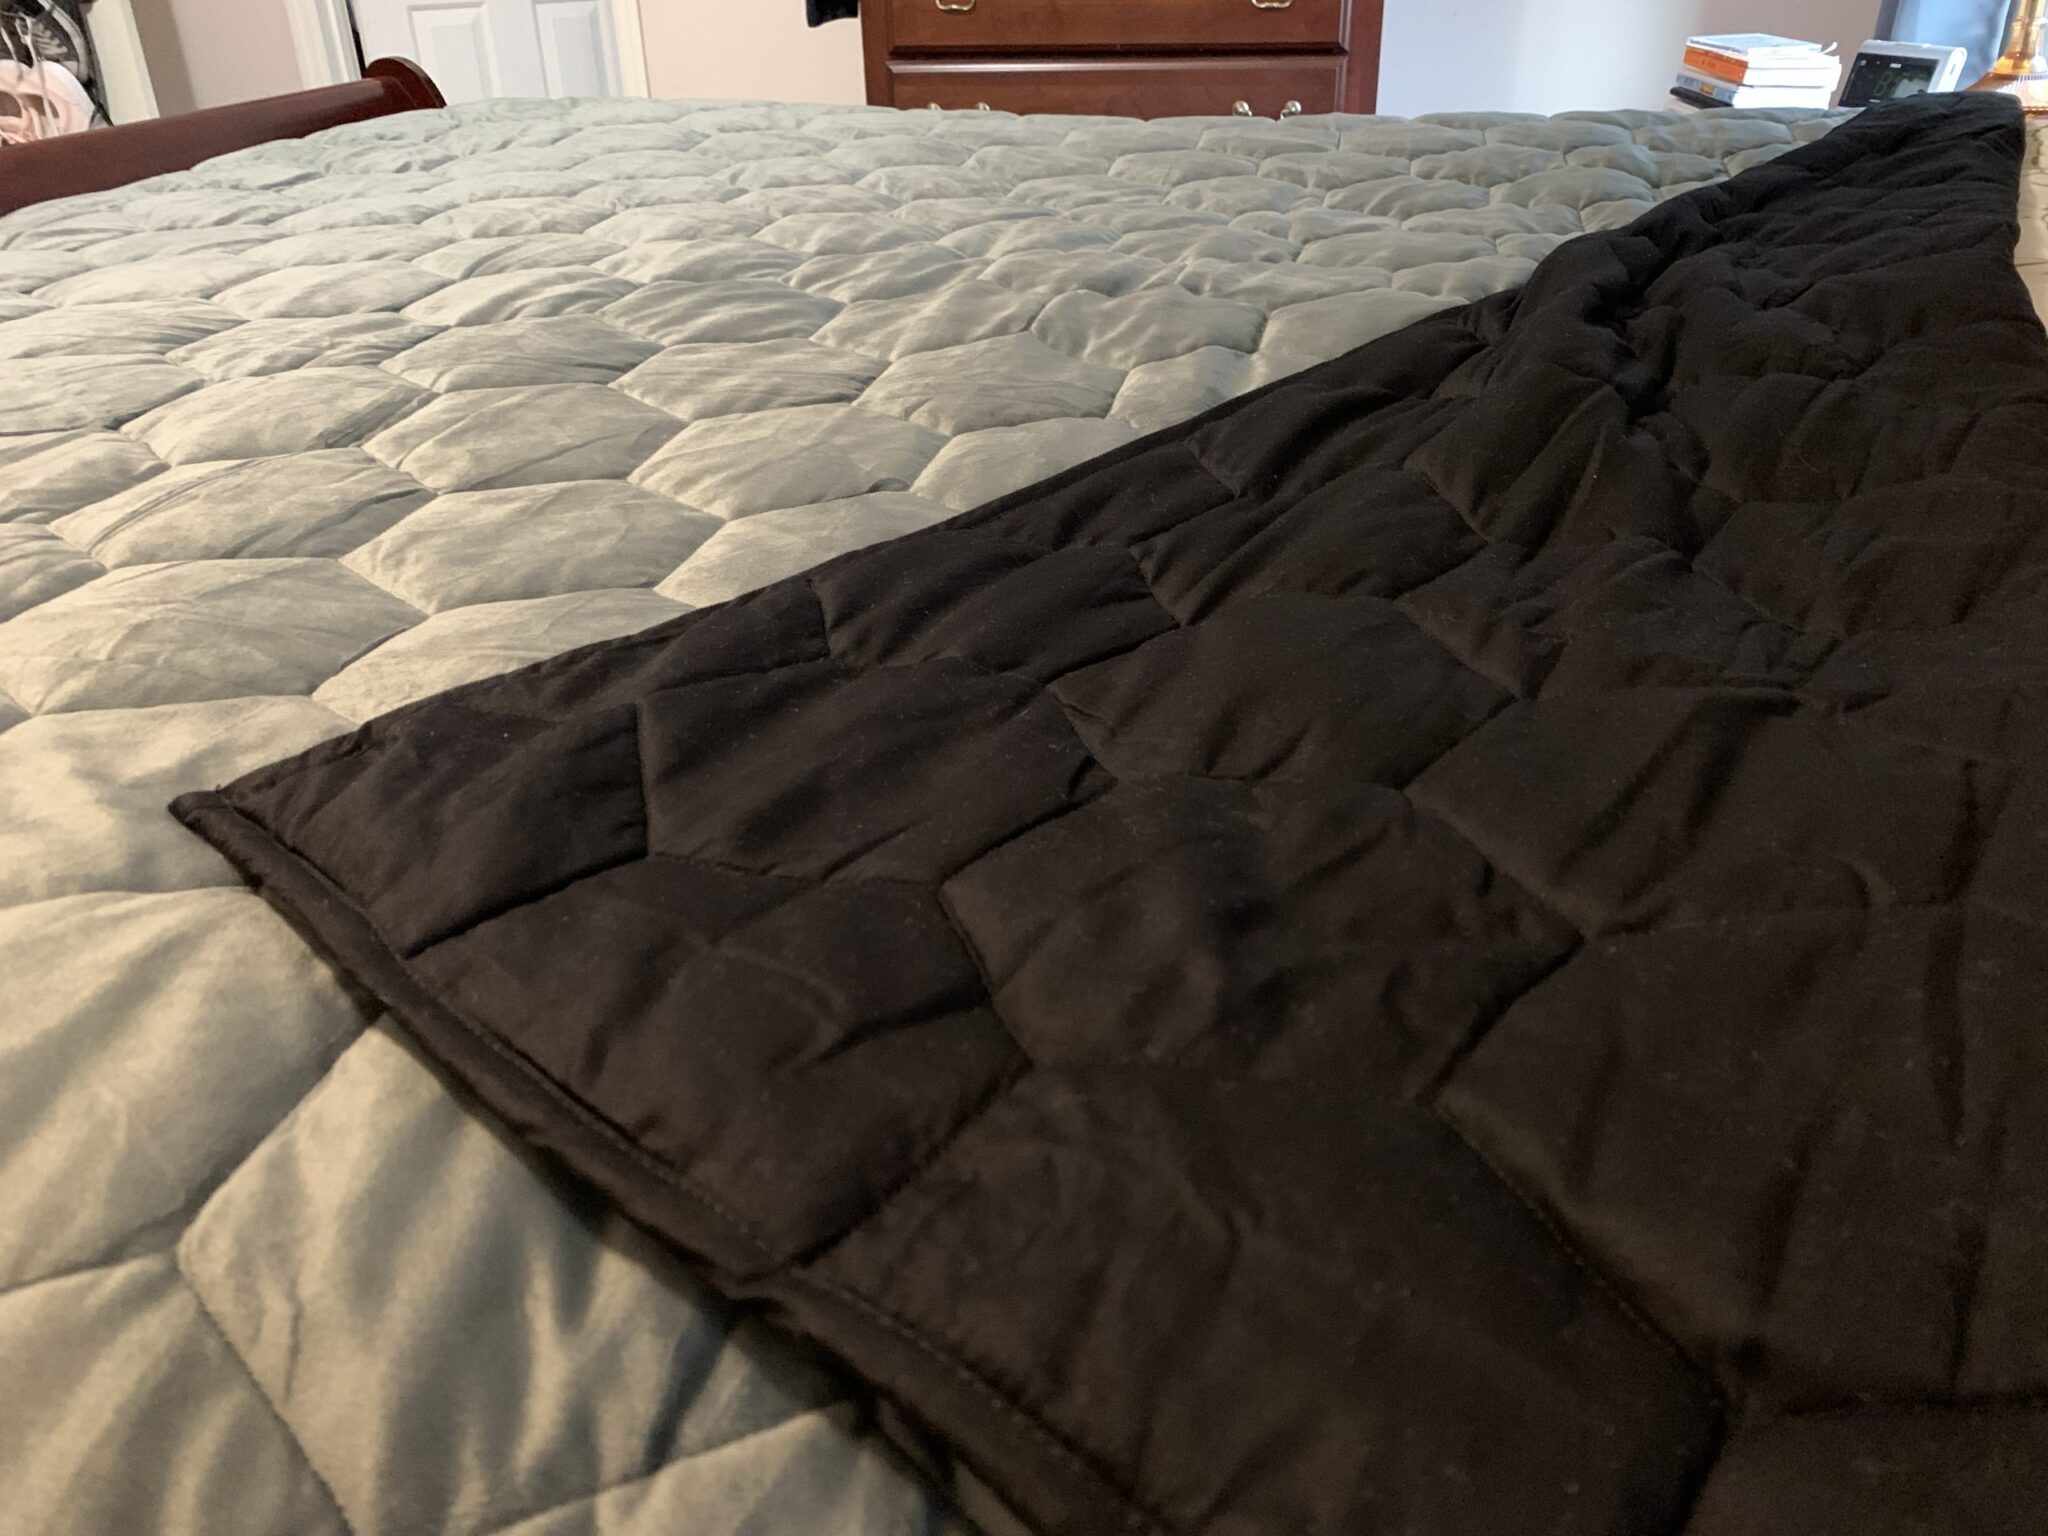 layla weighted blanket folded